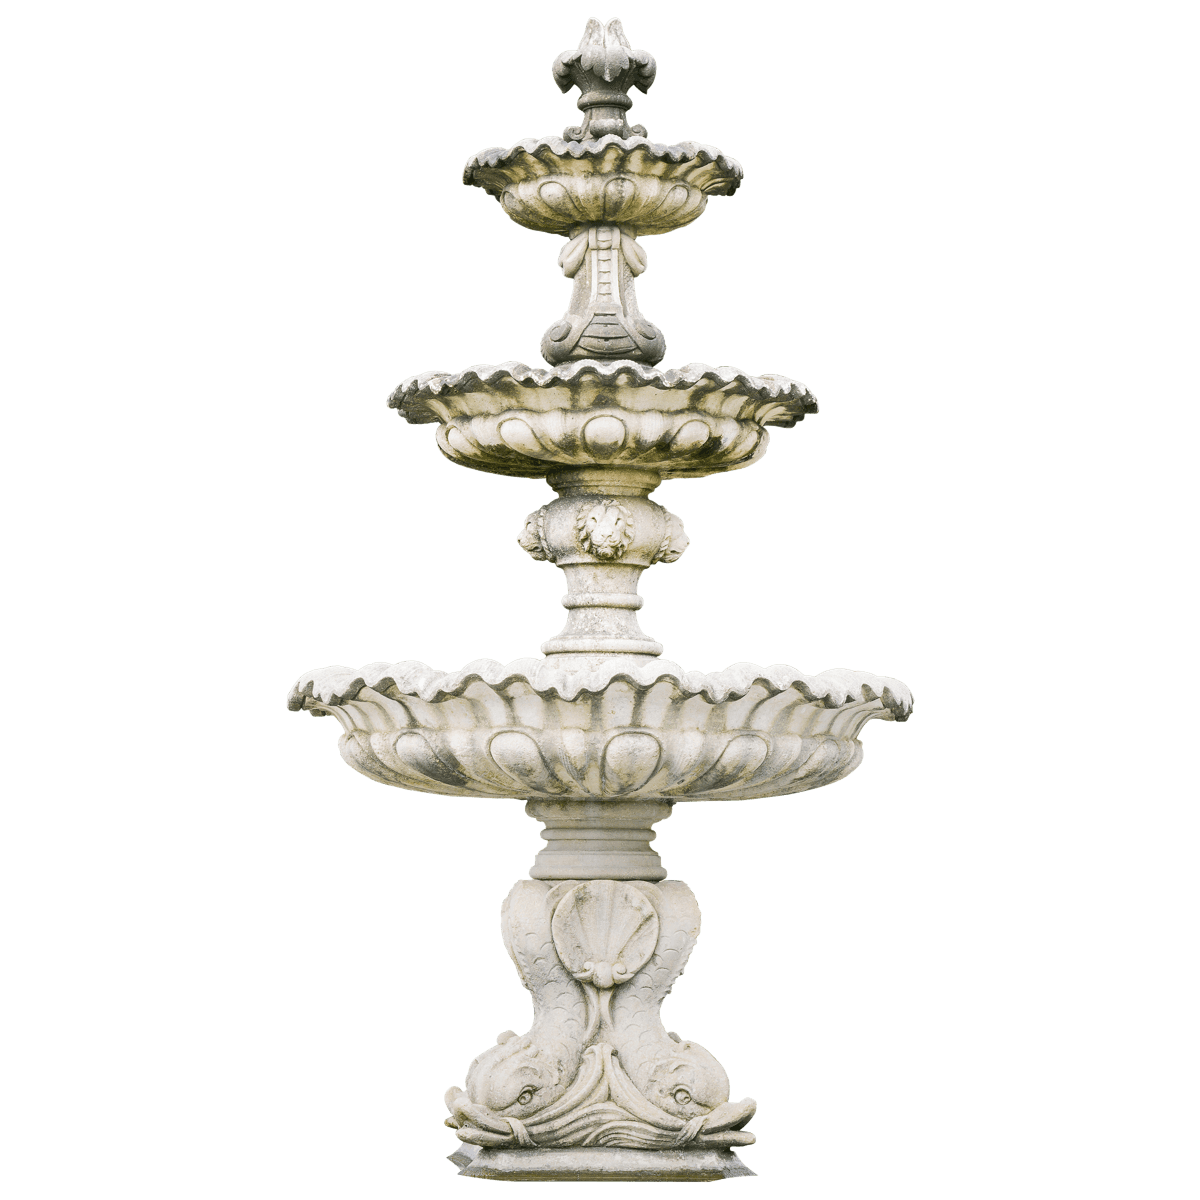 3 Stage Fountain PNG Image - PurePNG | Free transparent CC0 PNG Image